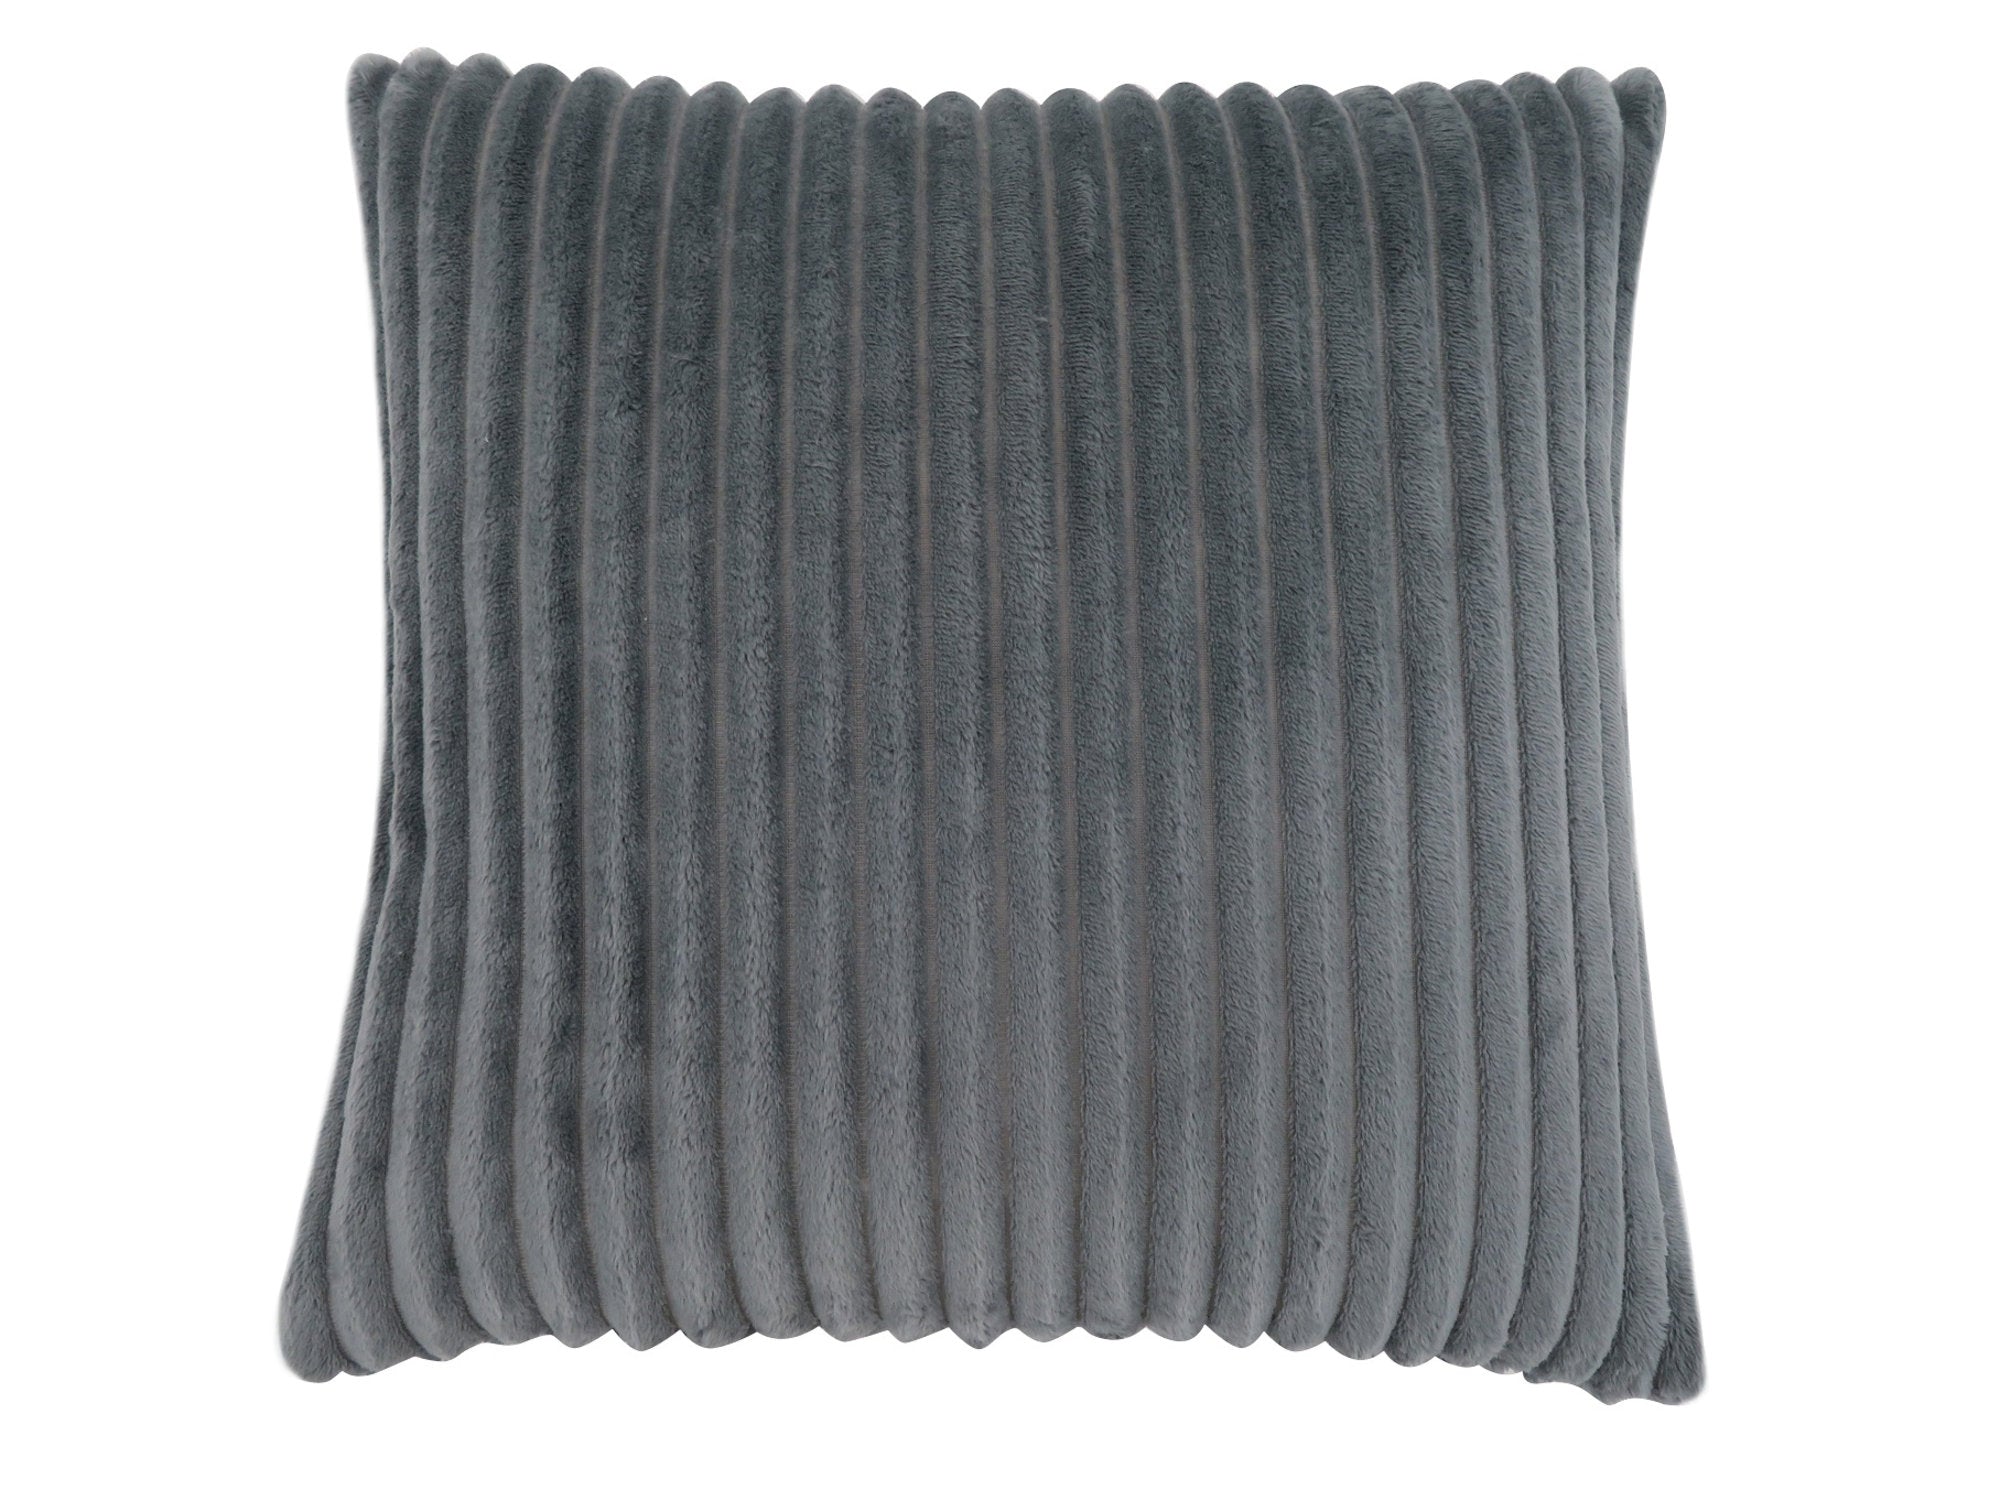 MN-939352    Pillows, 18 X 18 Square, Insert Included, Decorative Throw, Accent, Sofa, Couch, Bed, Faux Fur Polyester Fabric, Hypoallergenic Soft Polyester Insert, Grey, Transitional